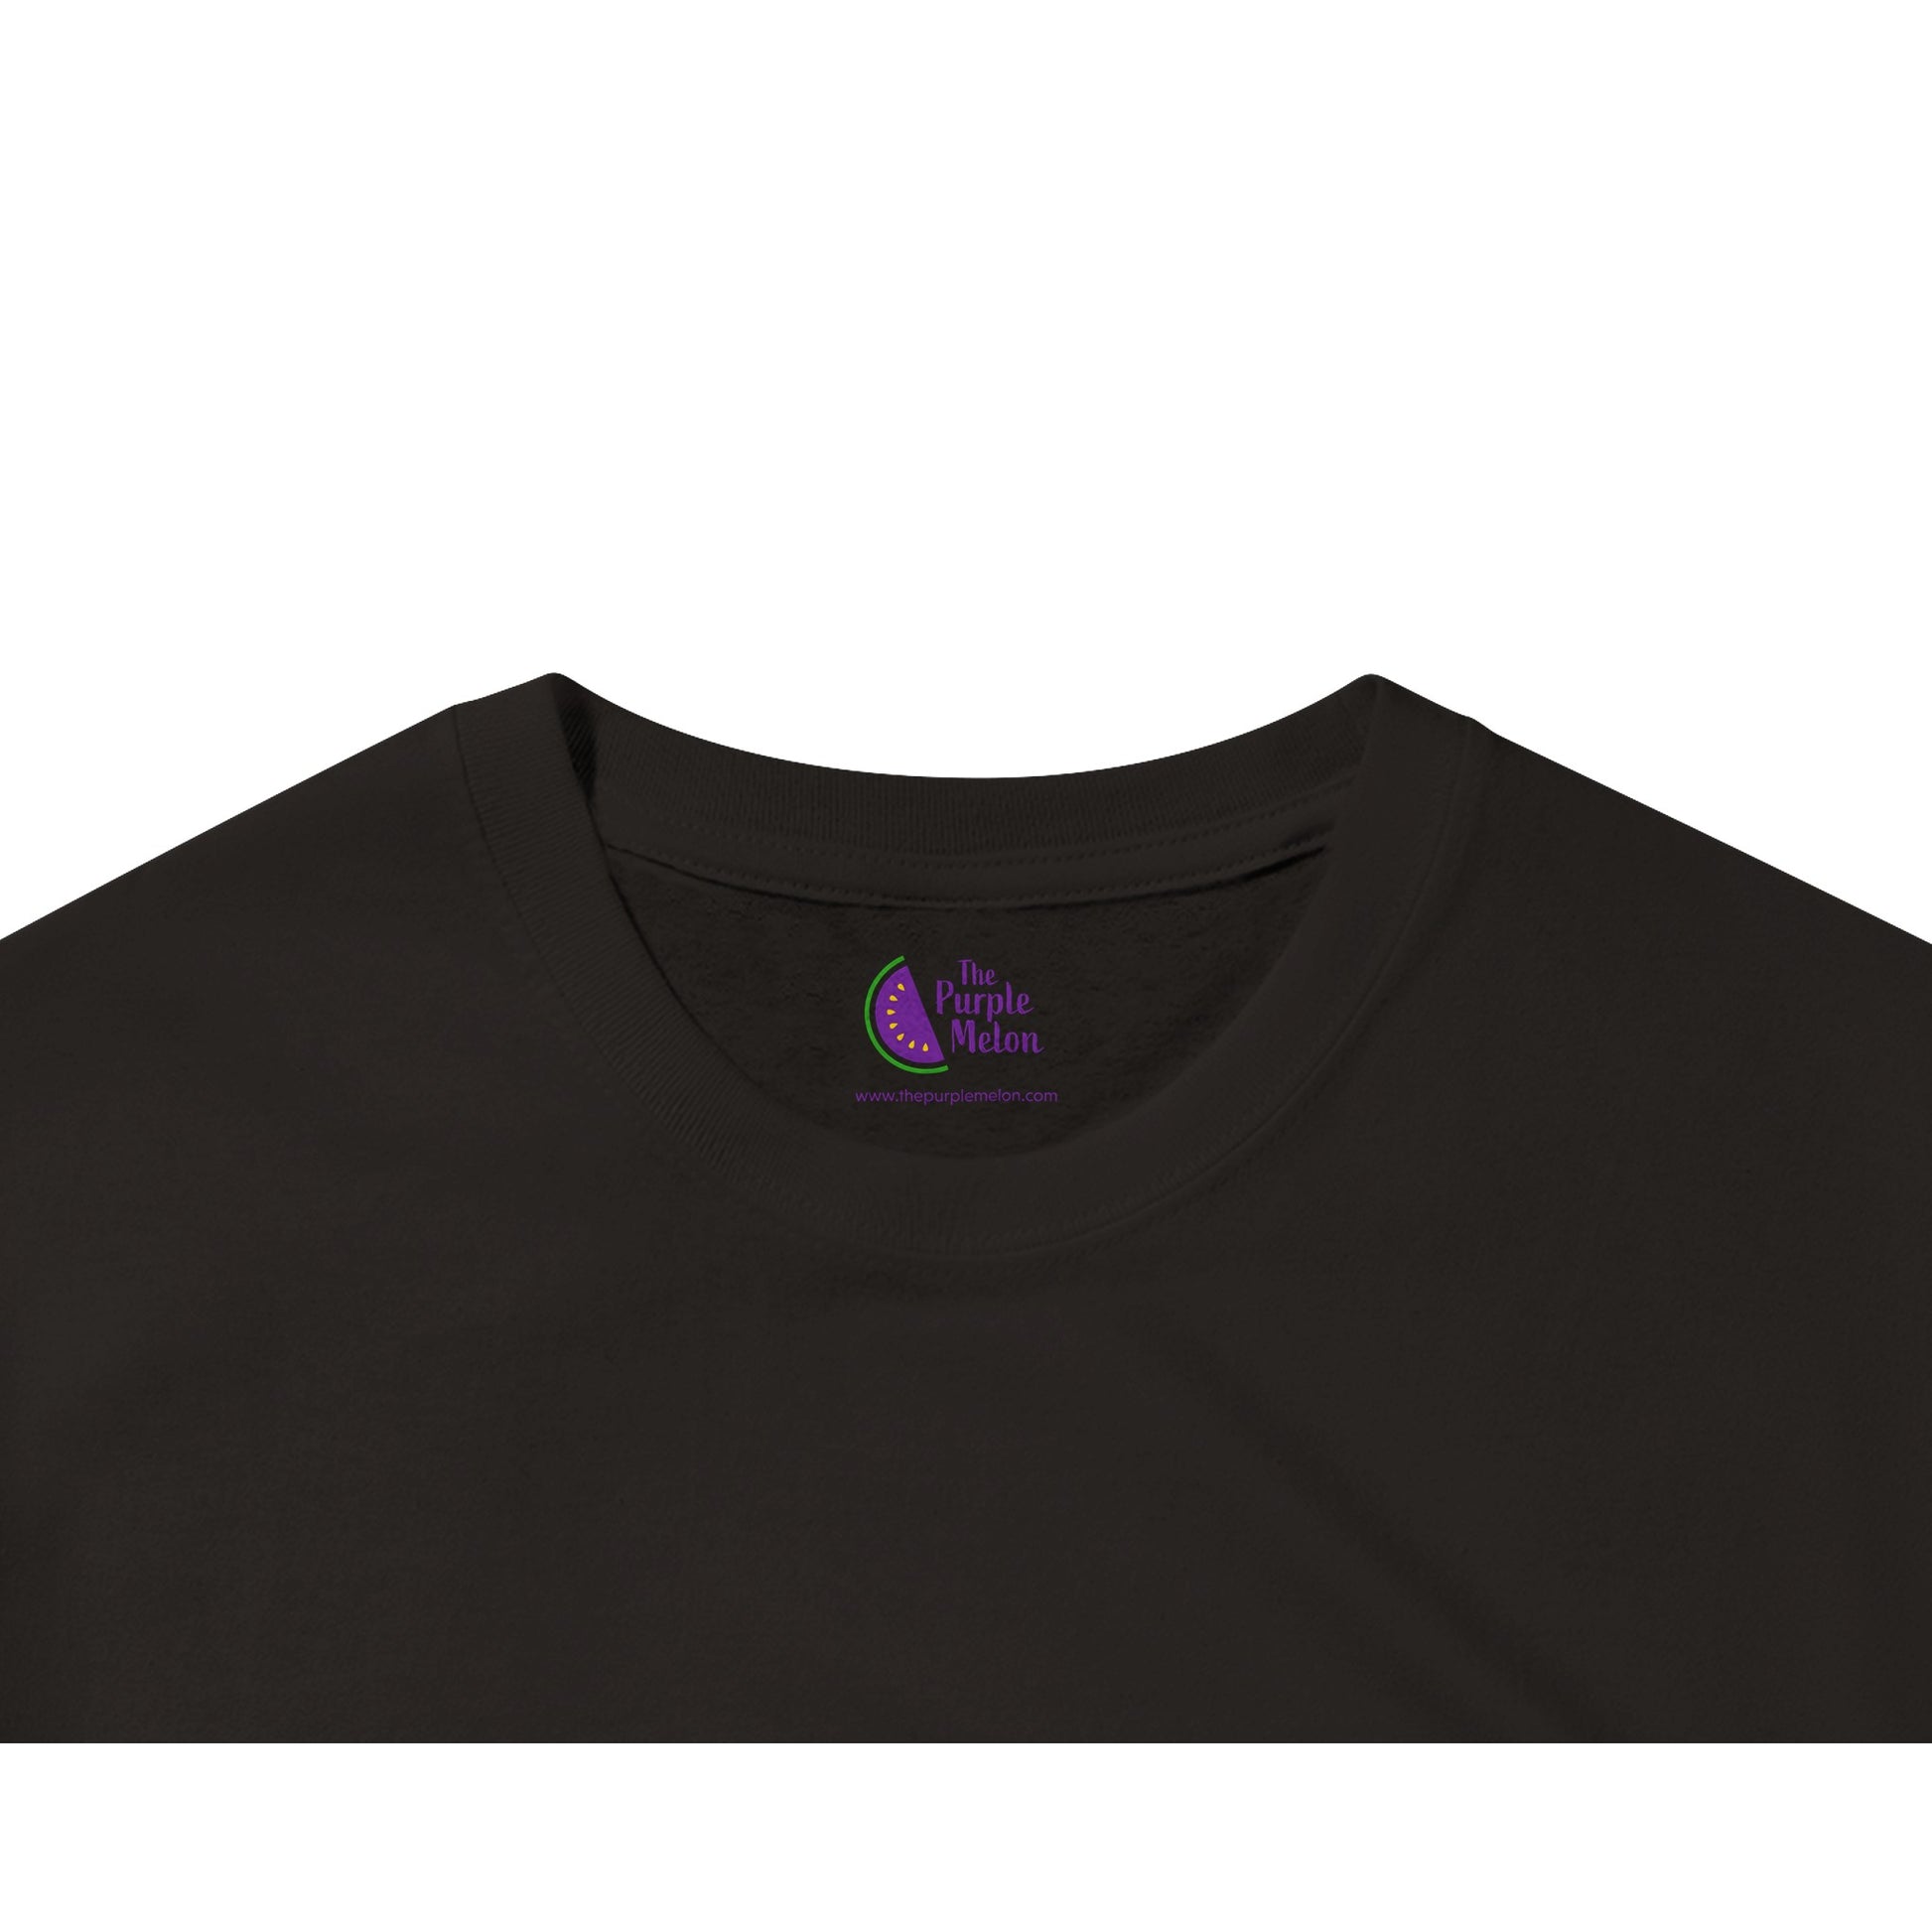 neck label on a black t-shirt with the purple melon logo